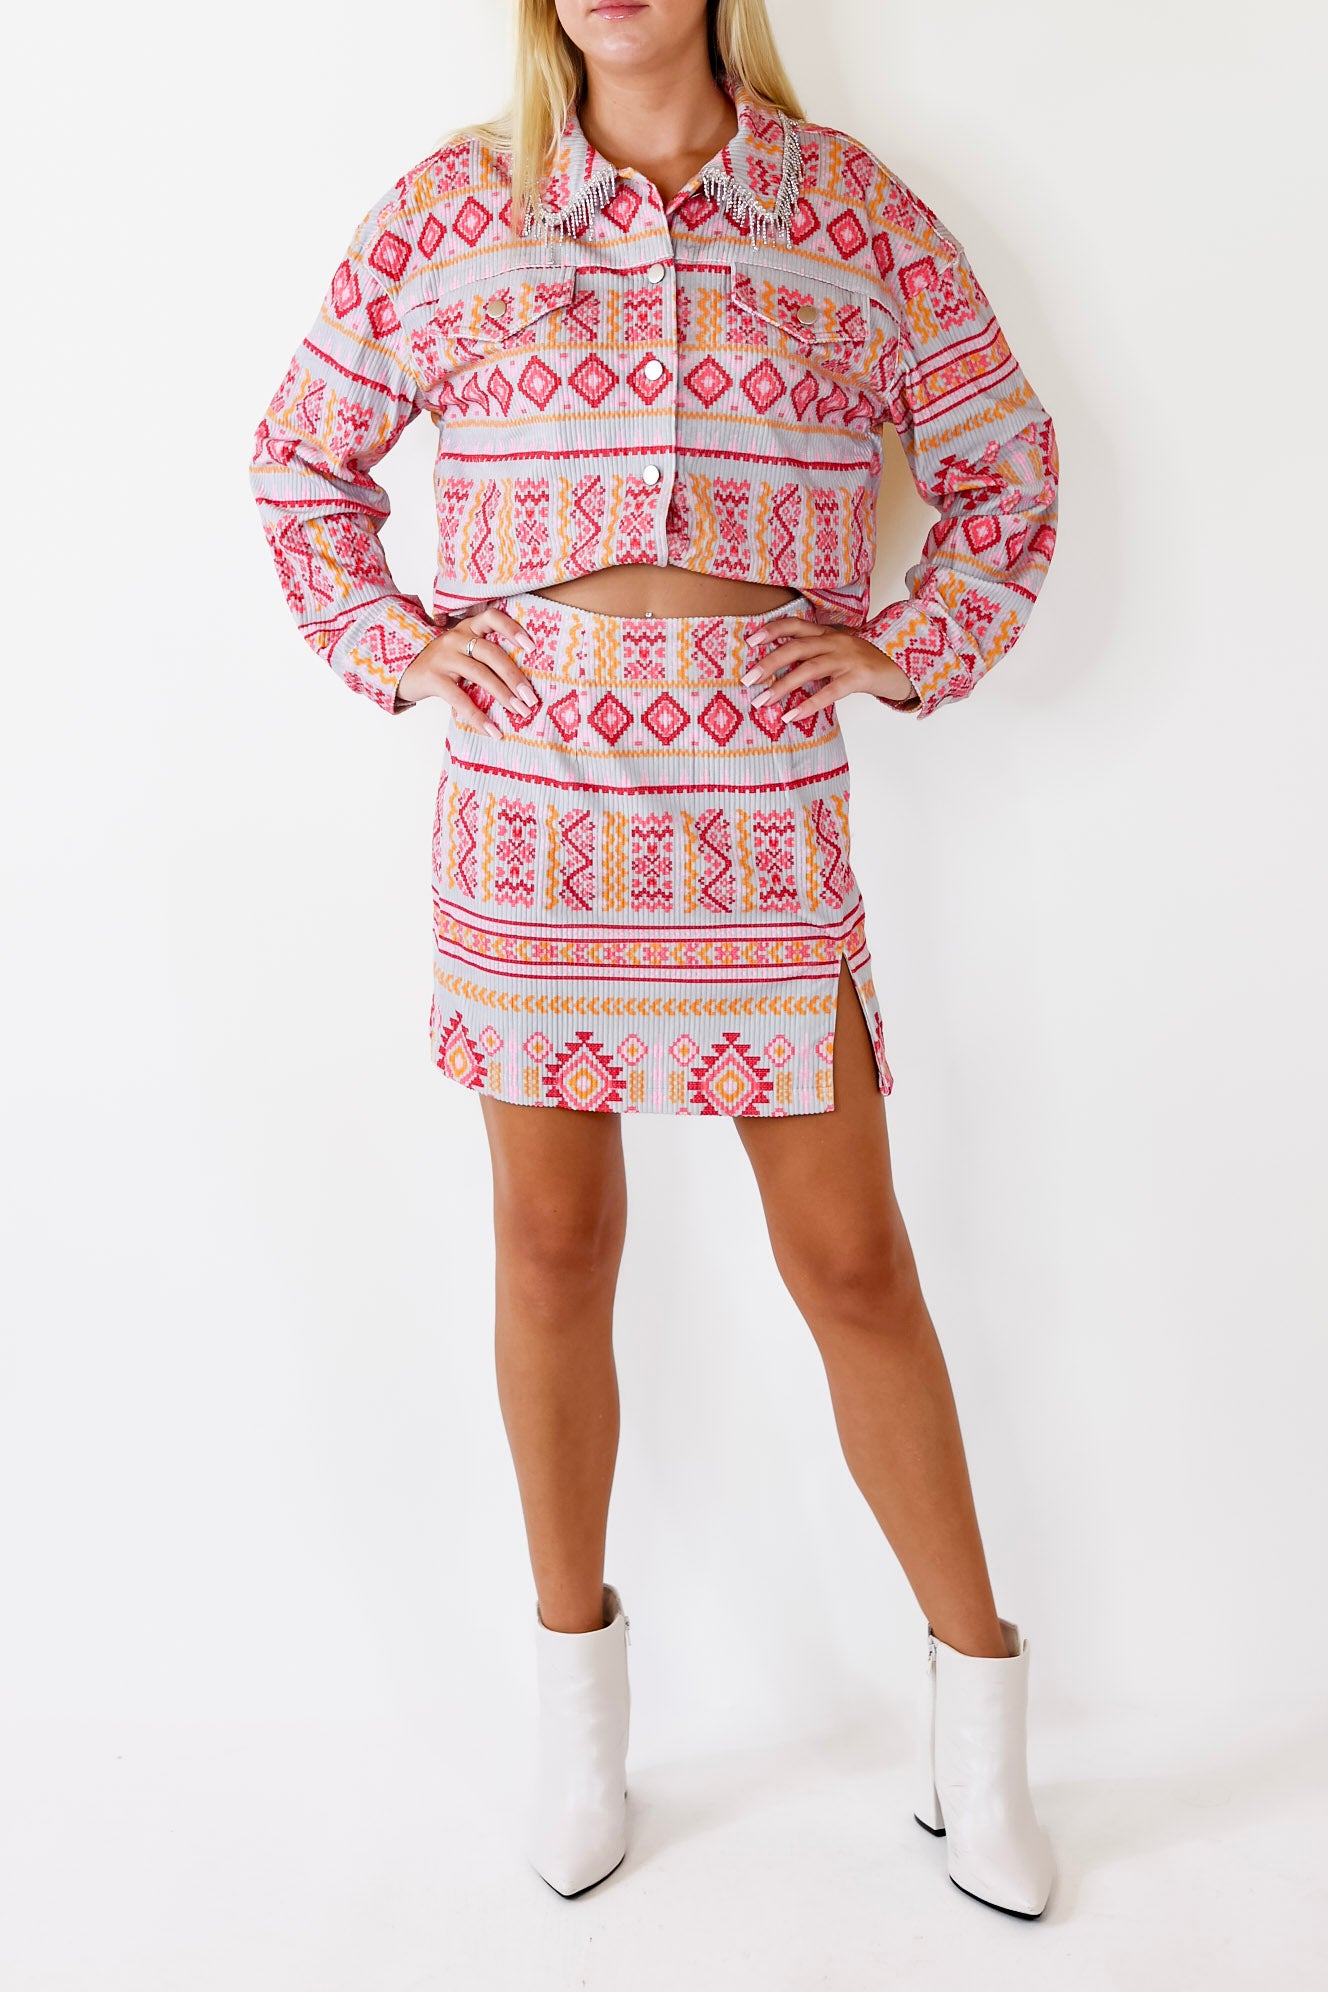 Music For The Soul Corduroy Aztec Print Mini Skirt in Grey - Giddy Up Glamour Boutique